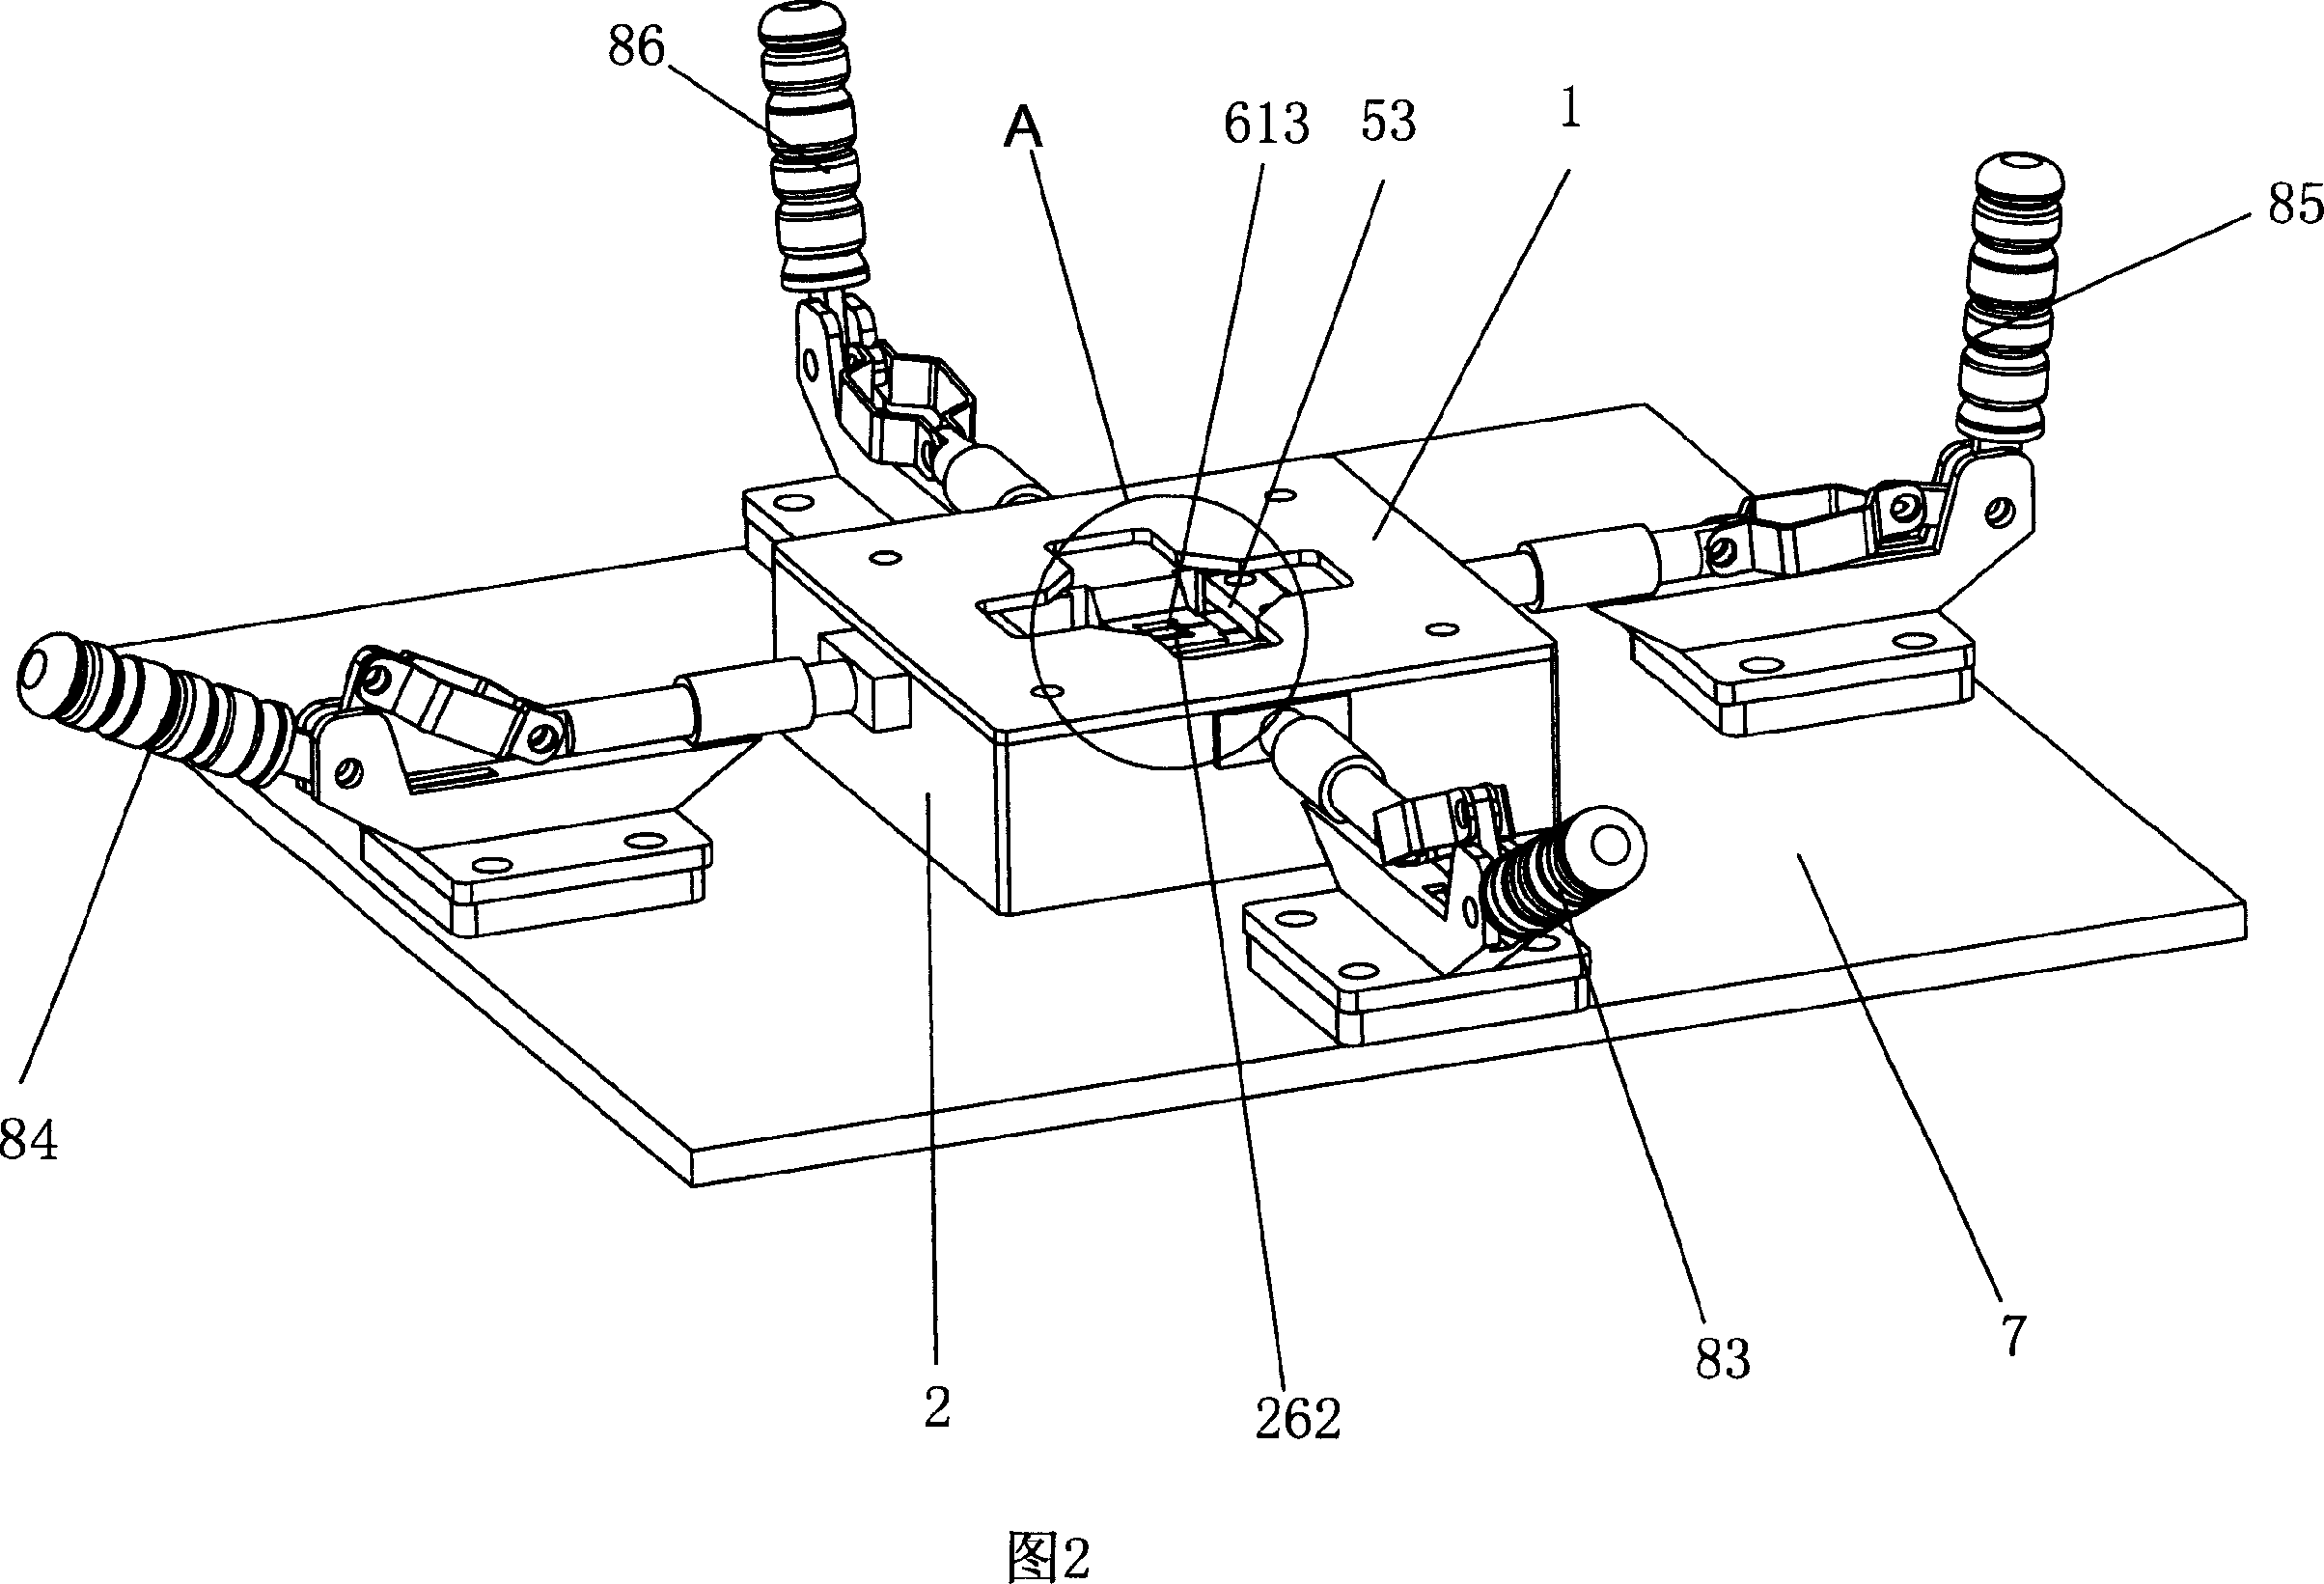 Method for return repairing image sensing mould set and clamp therewith